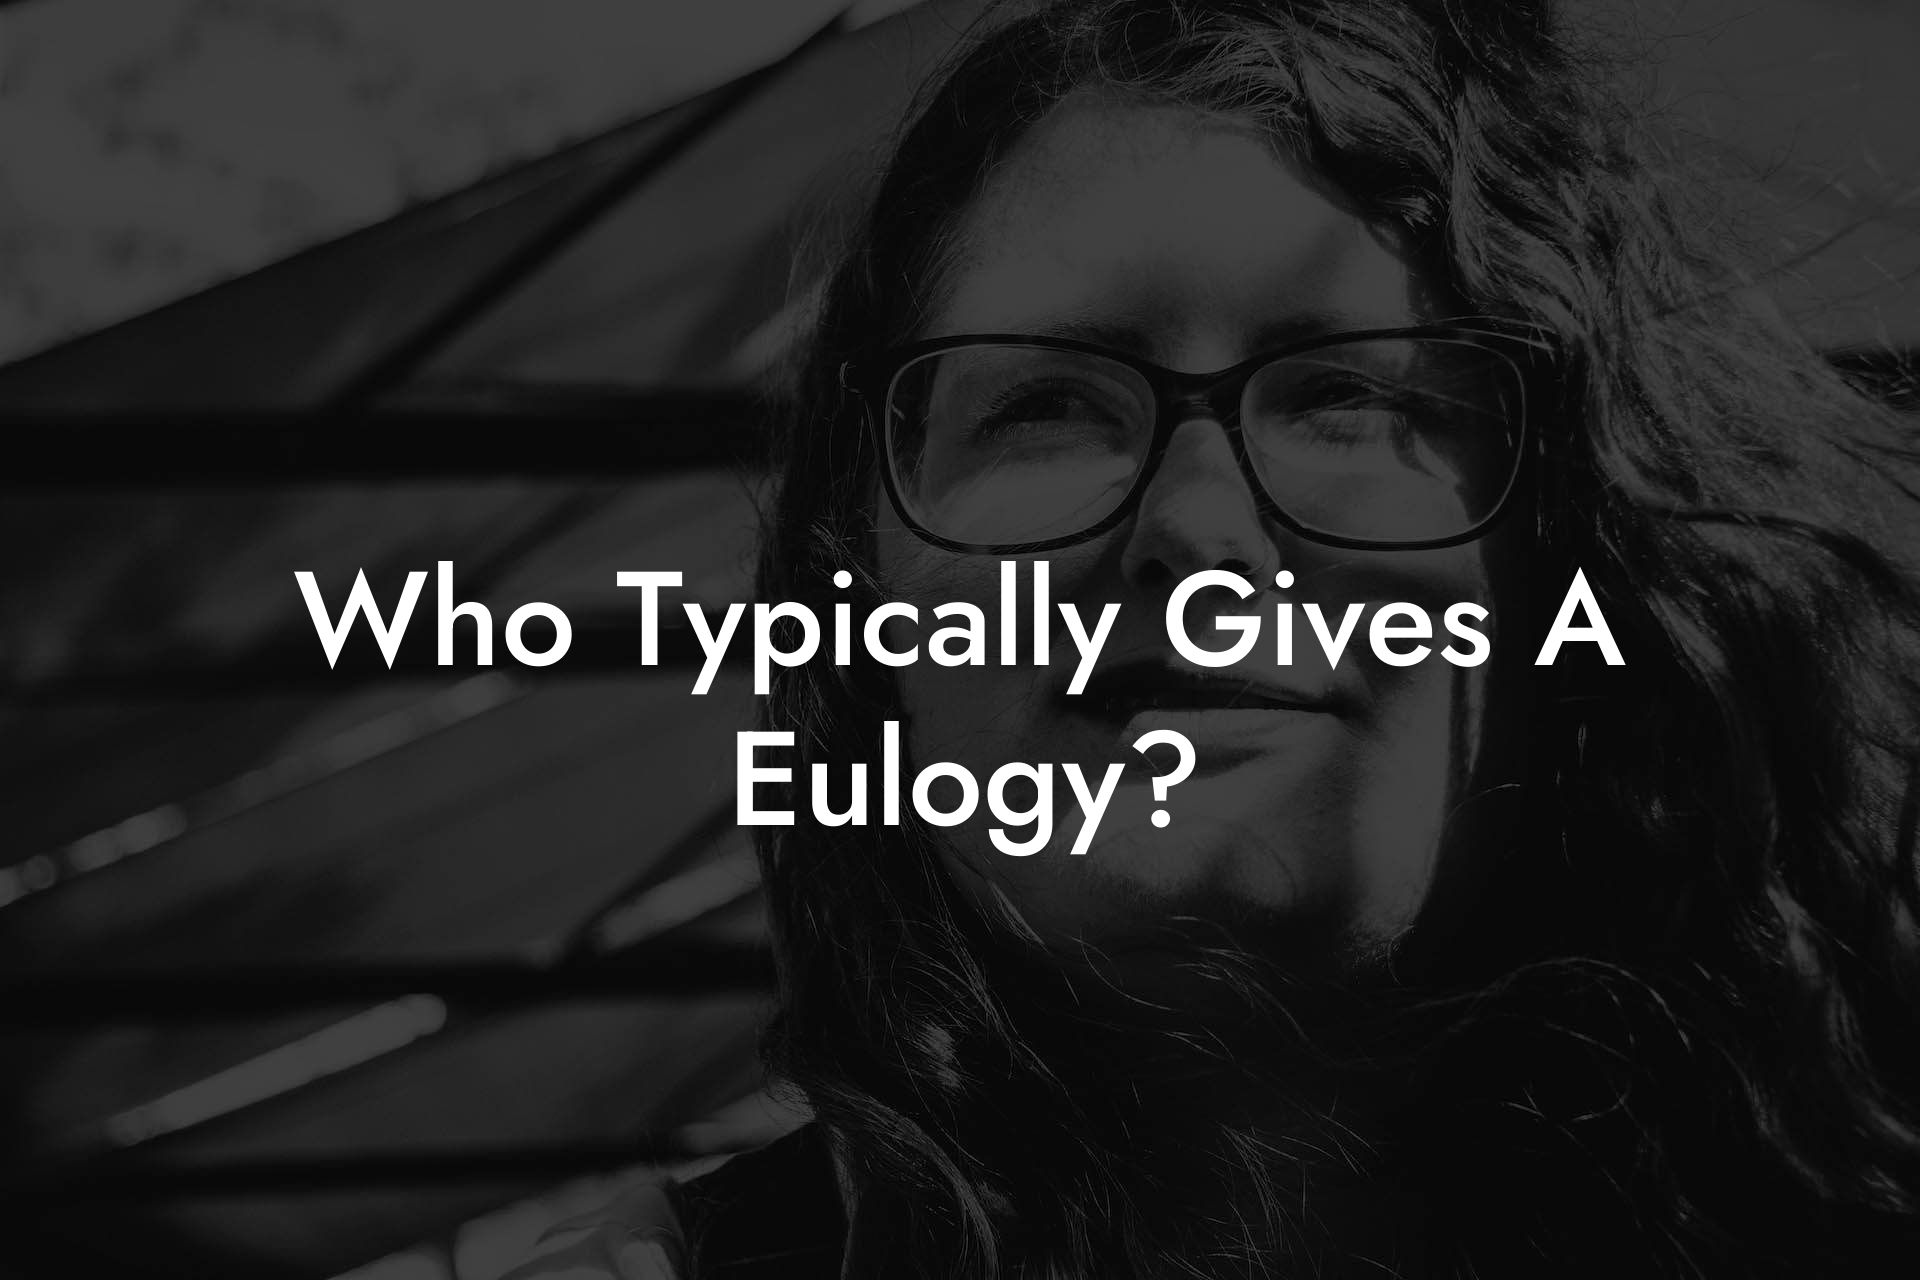 Who Typically Gives A Eulogy?